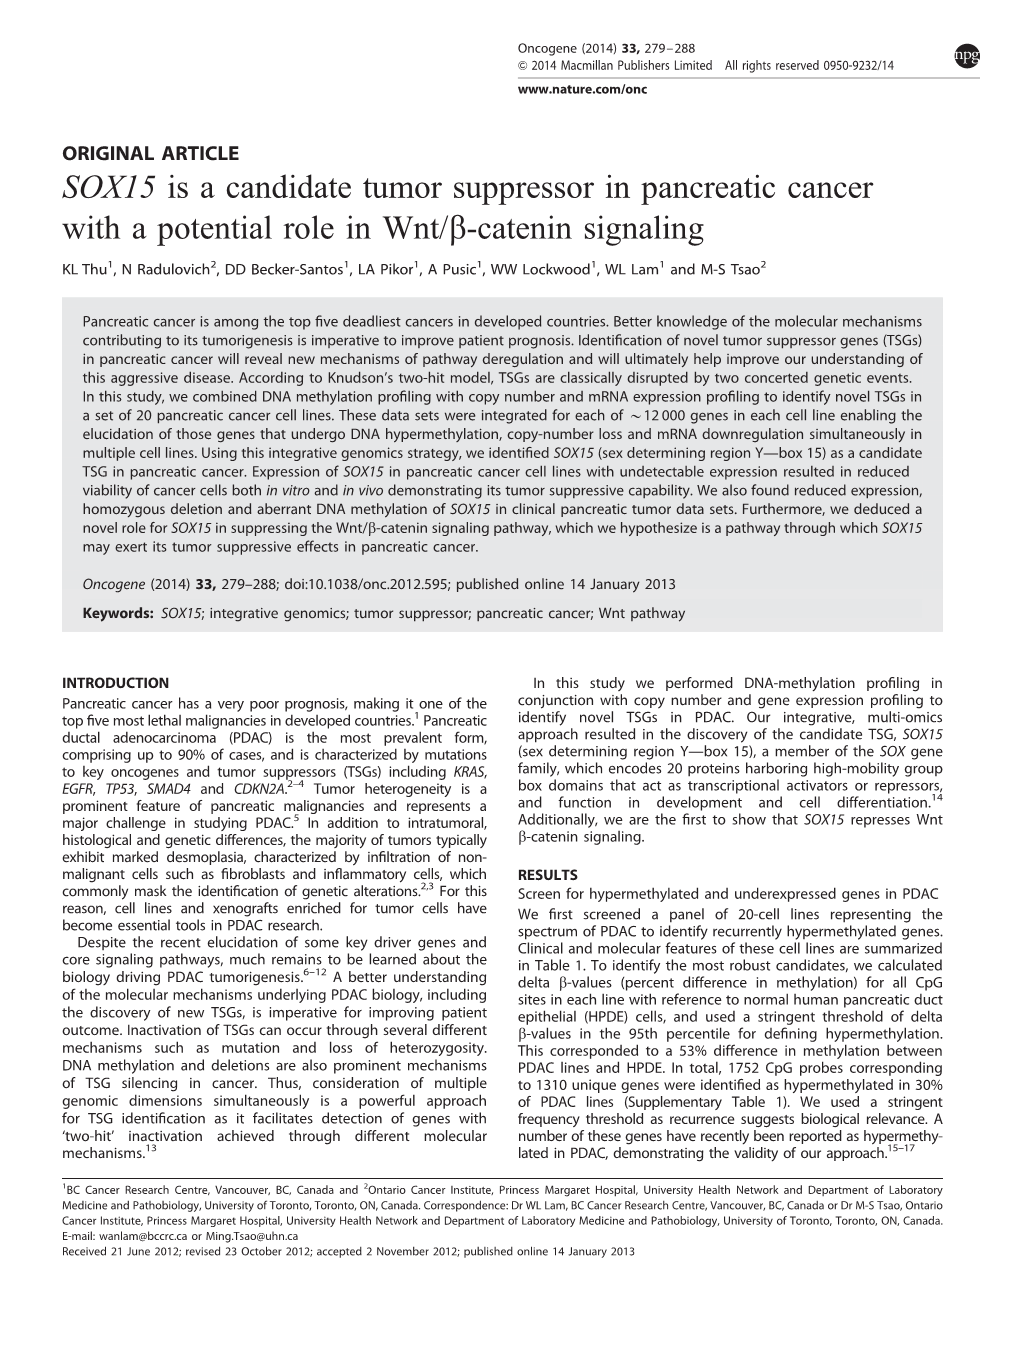 SOX15 Is a Candidate Tumor Suppressor in Pancreatic Cancer with a Potential Role in Wnt/B-Catenin Signaling